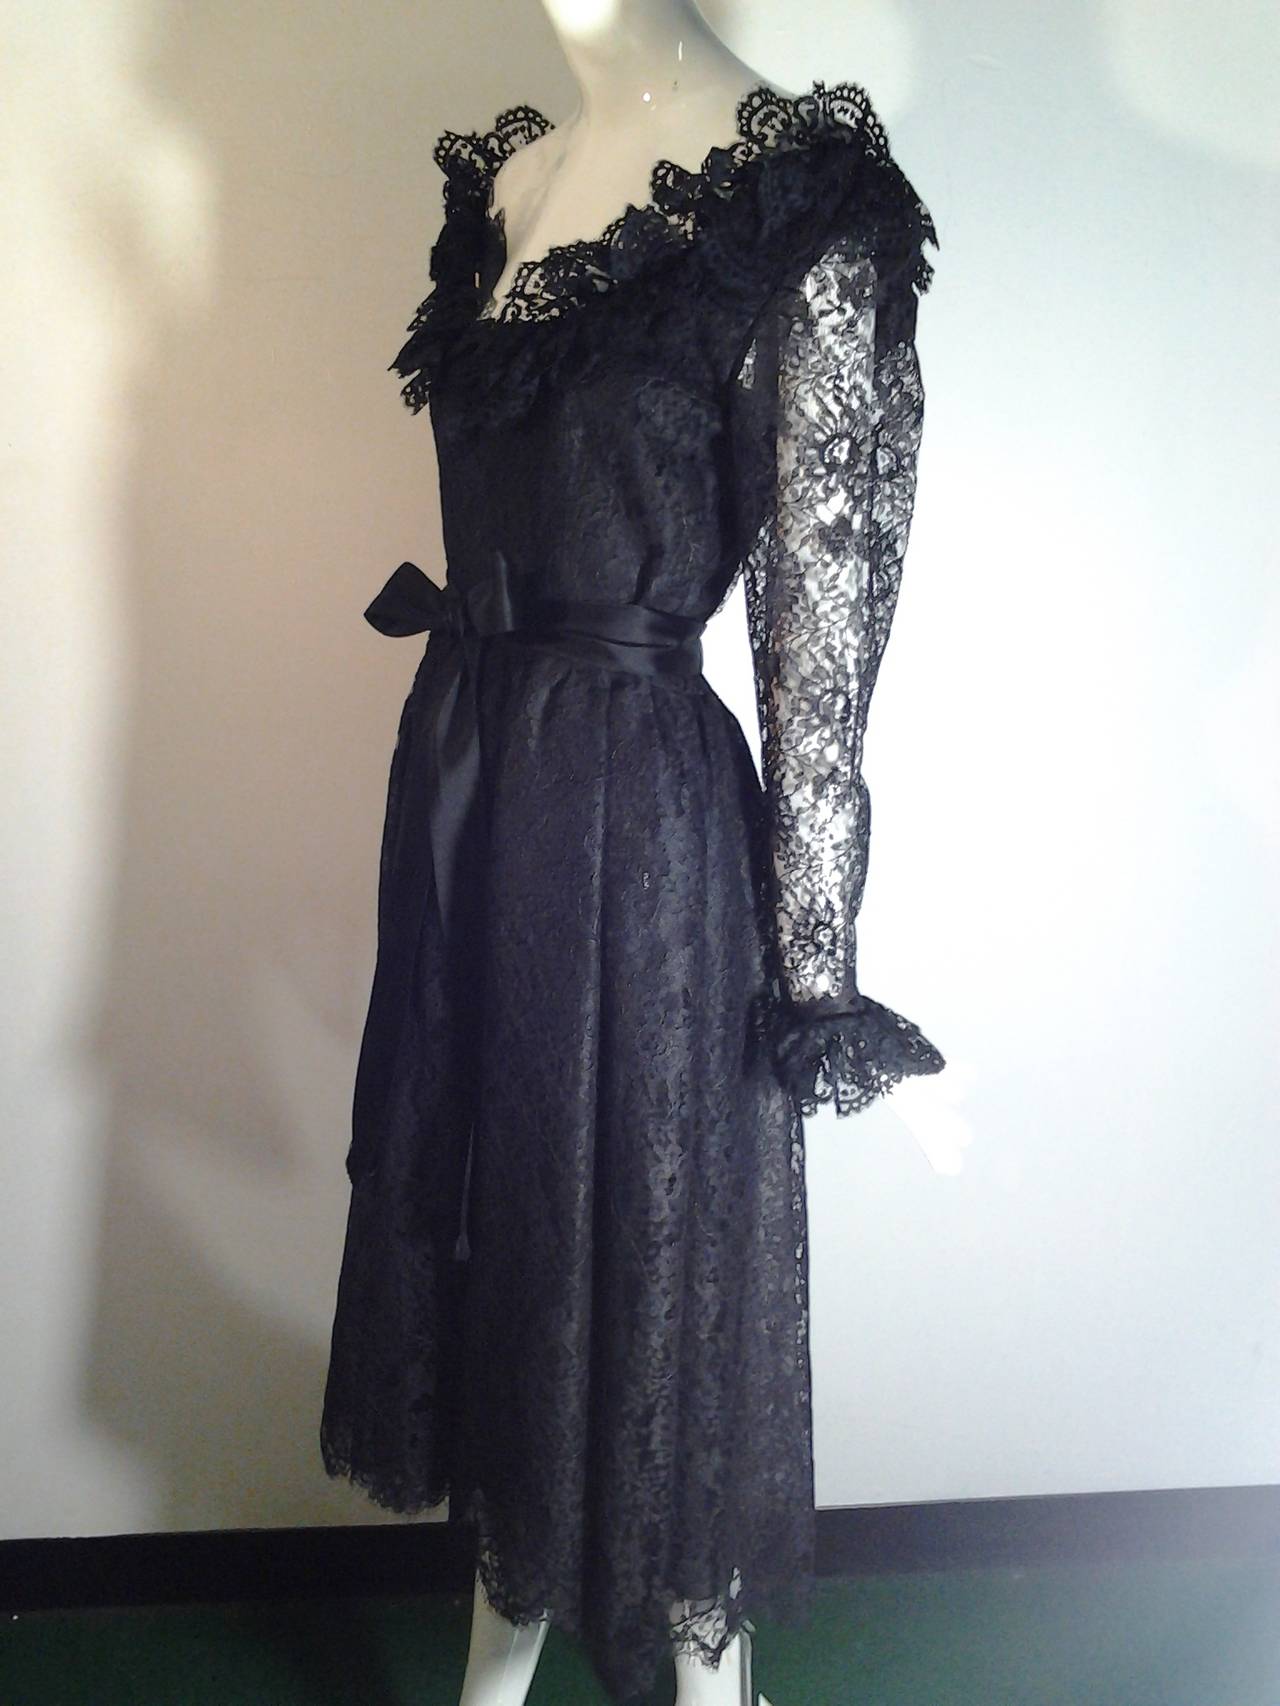 1970s Oscar de La Renta black lace illusion cocktail dress with sheer ruffle cuff sleeves, neckline and waist tie.  

3 layer lining in body of dress.